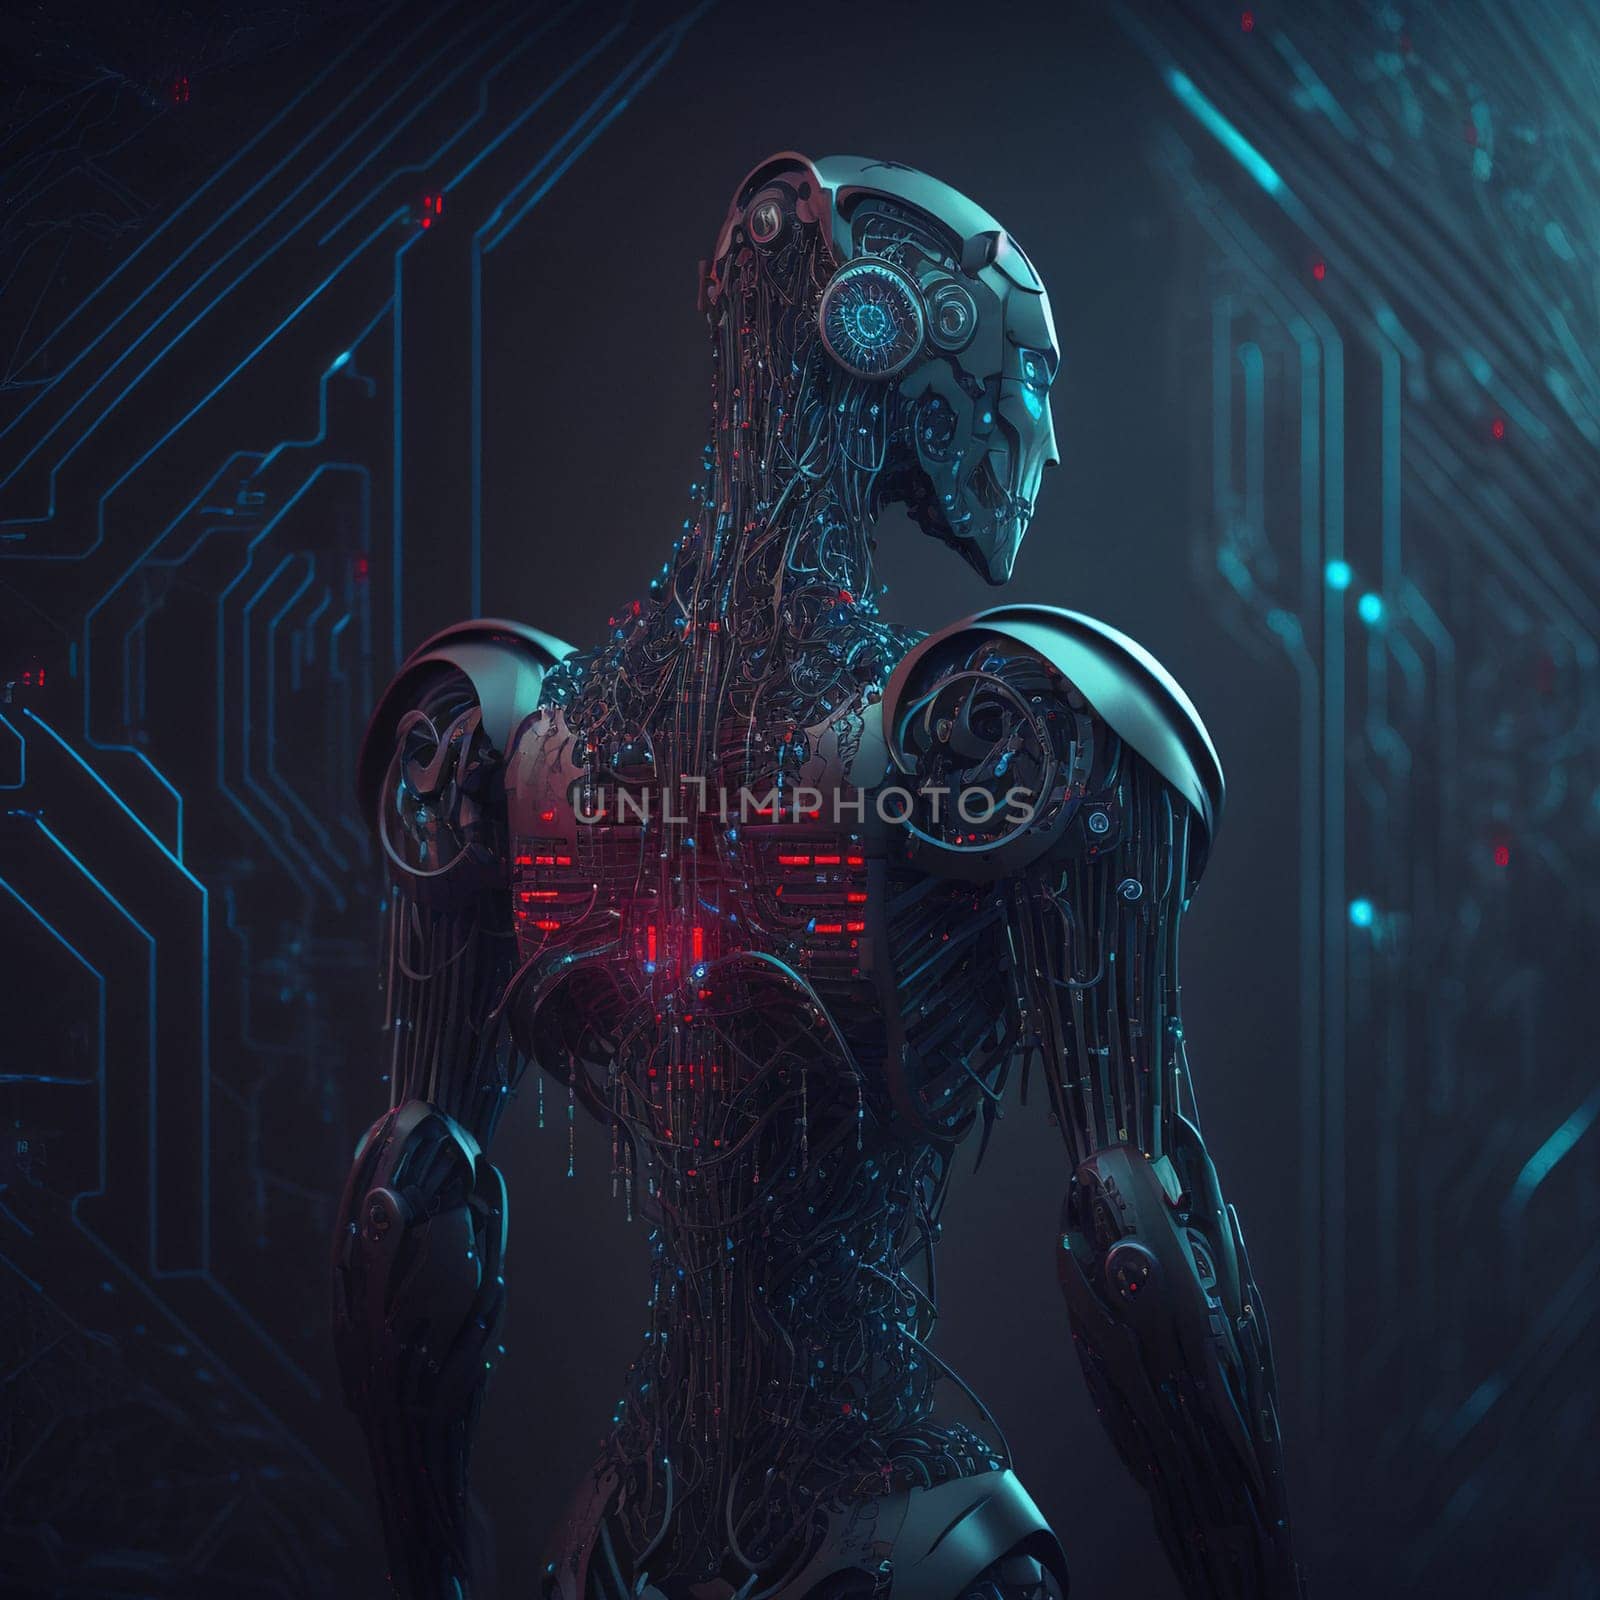 Digital Aesthetic with Cyber Bionic Network Wallpaper illustration